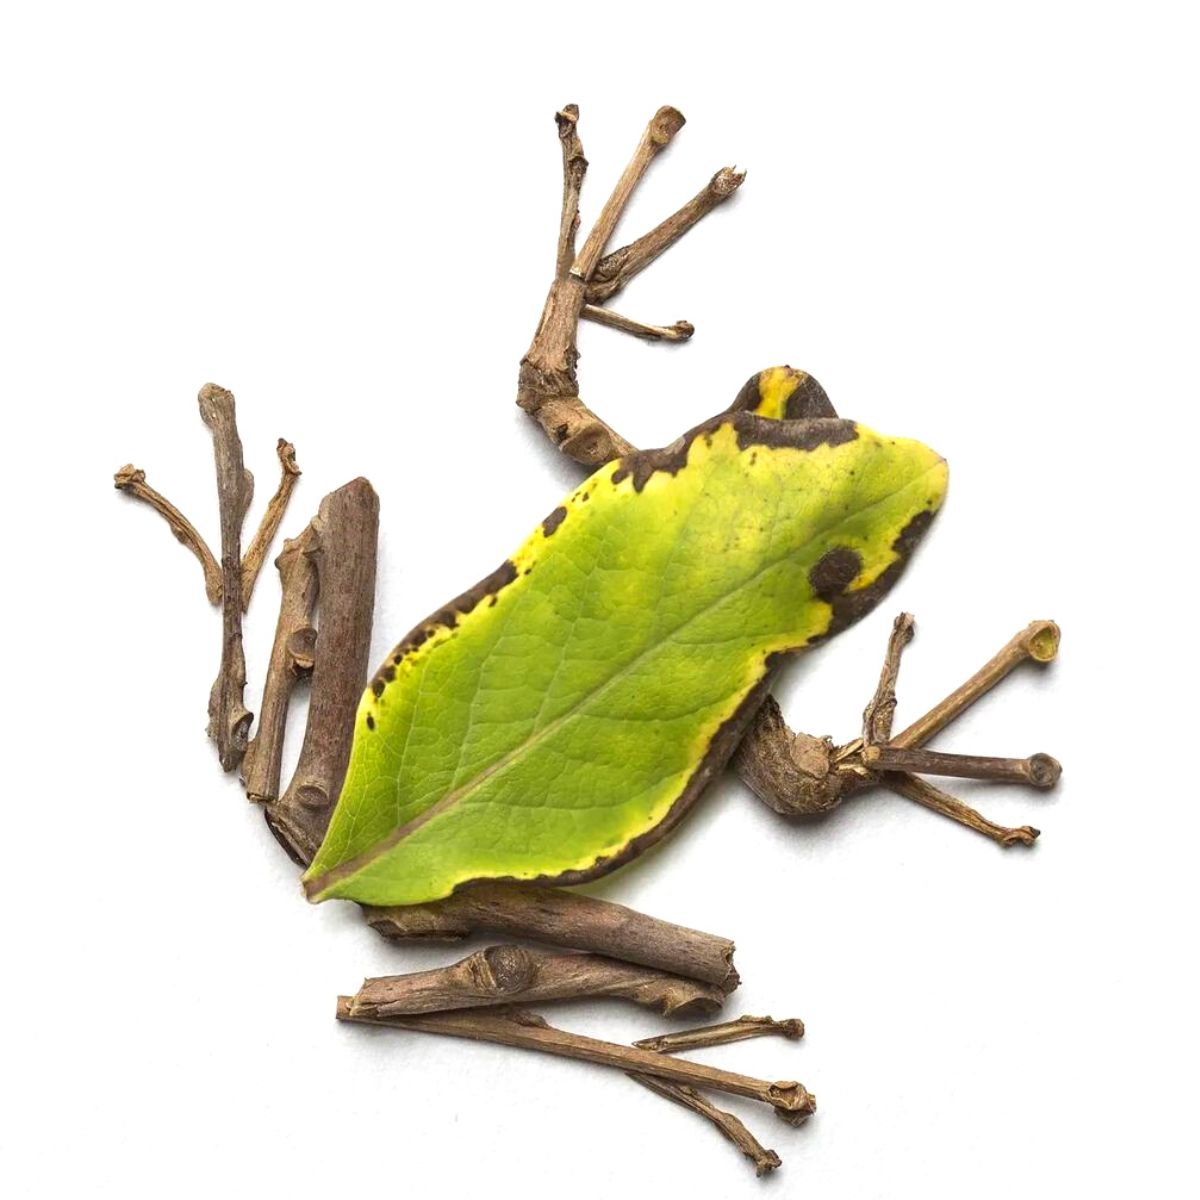 Frog made of leaves and stems